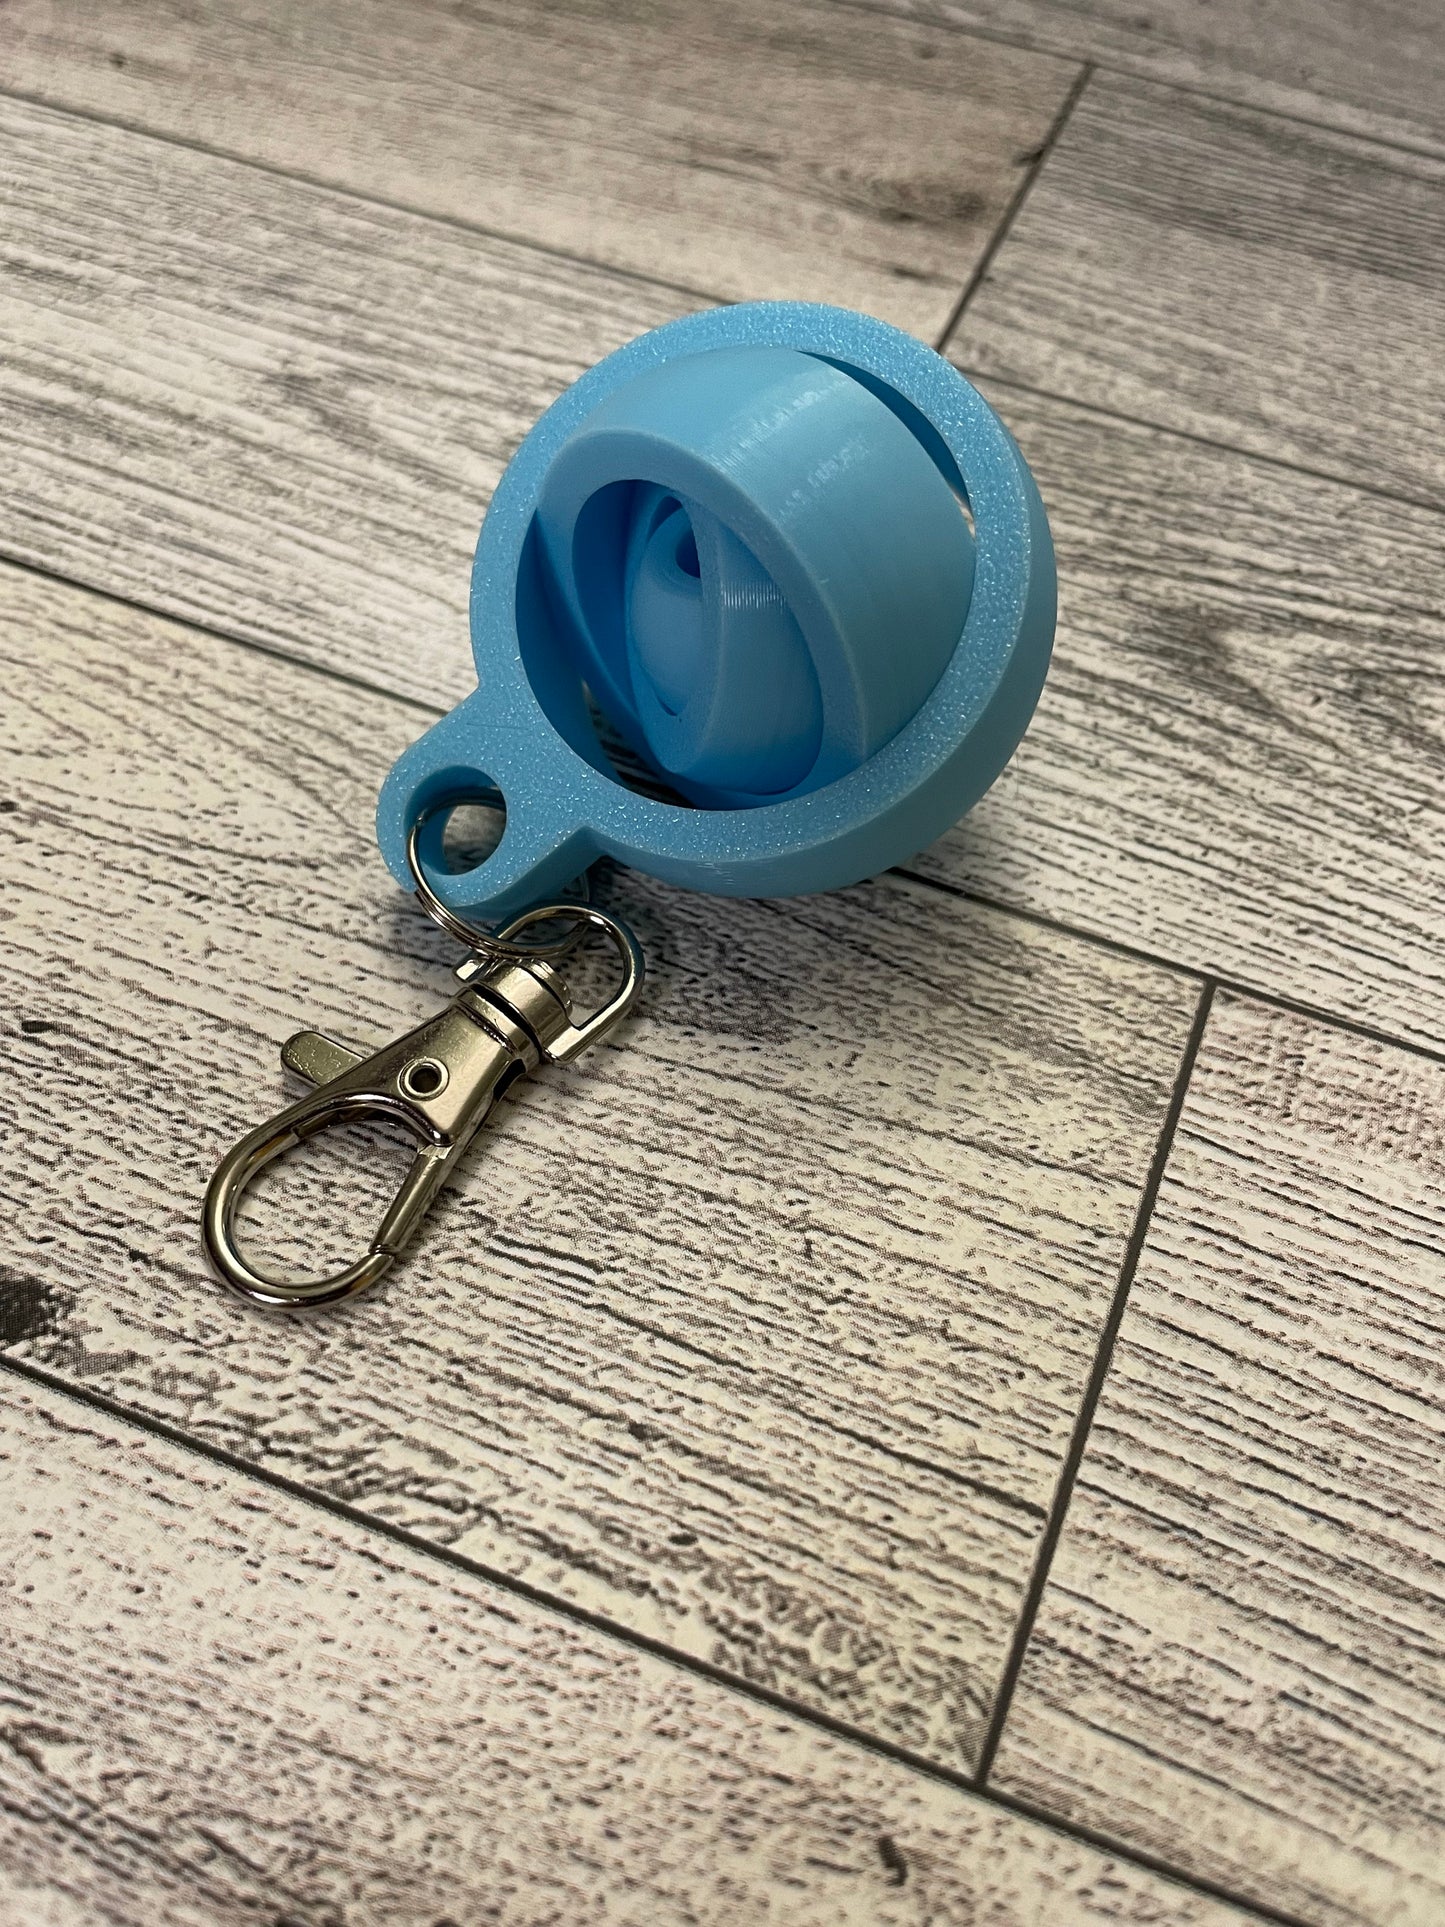 A small 3D printed gyro fidget that is about 1.5 inches in diameter on a wood background. It has four nested circles that can be spun and twirled. It is printed in light blue filament. The loop has a metal keychain attachment